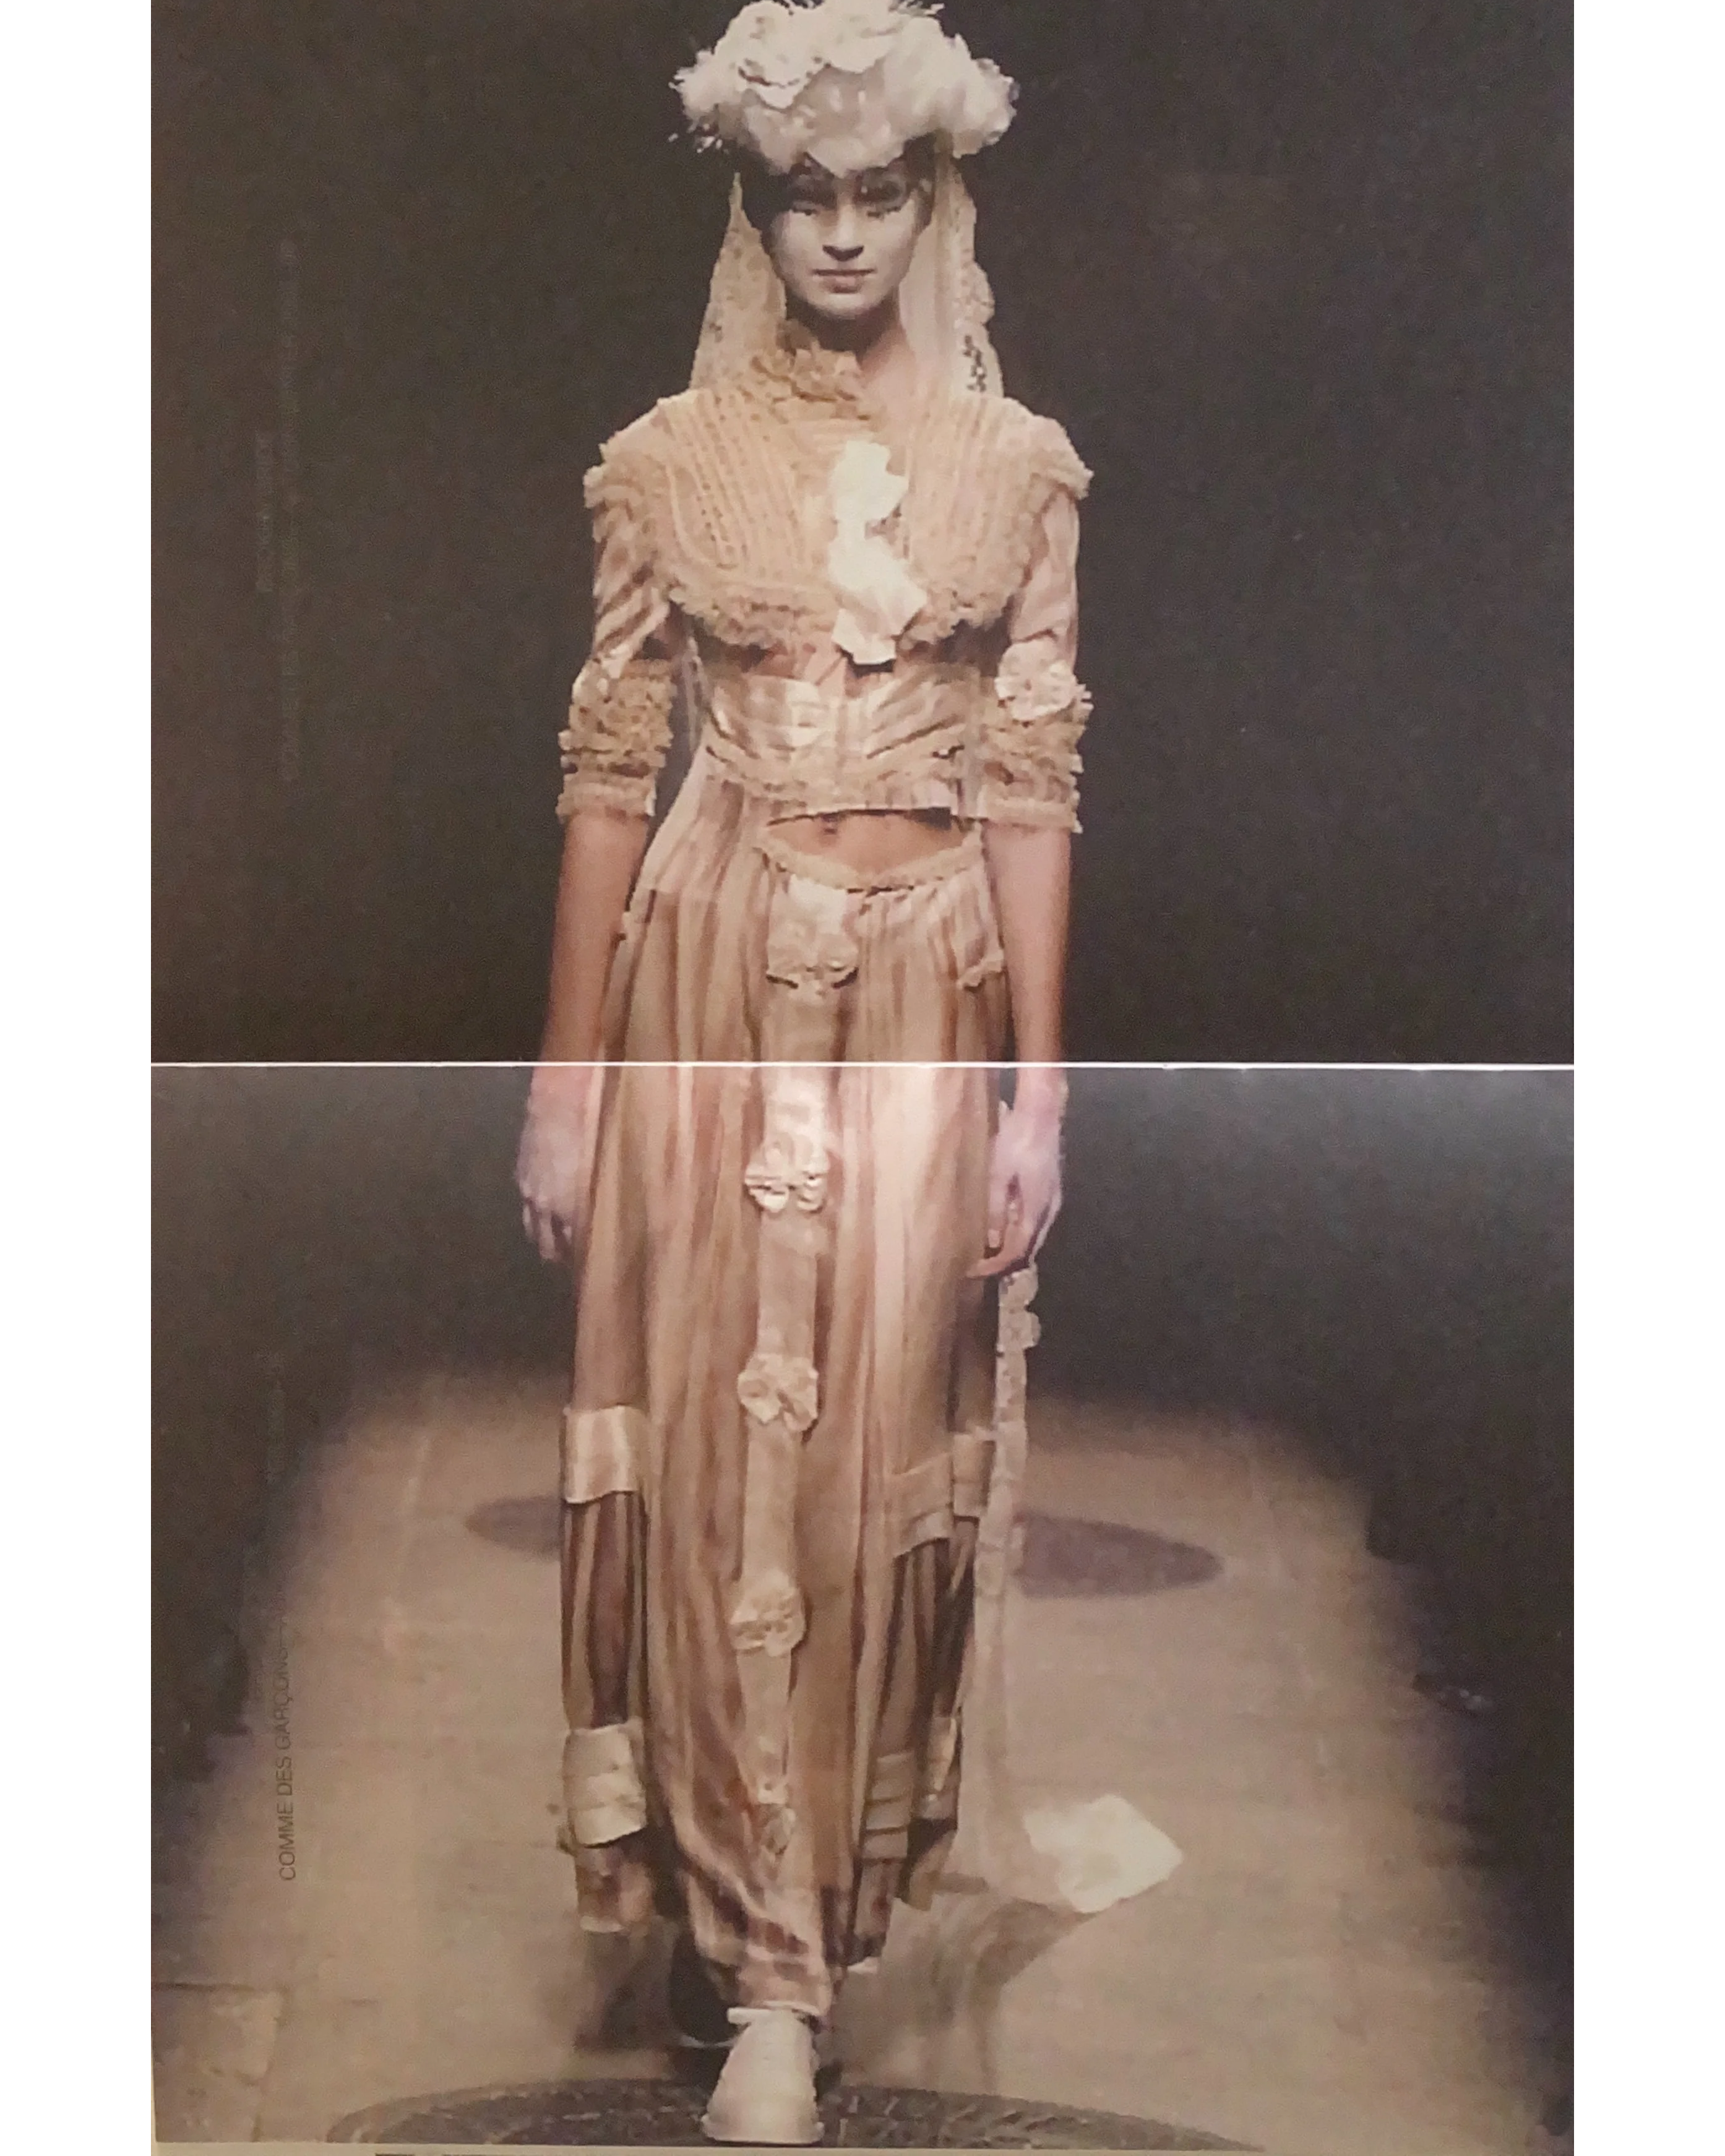 A/W 2005 'Broken Bride' Collection Deconstructed Tan Gown